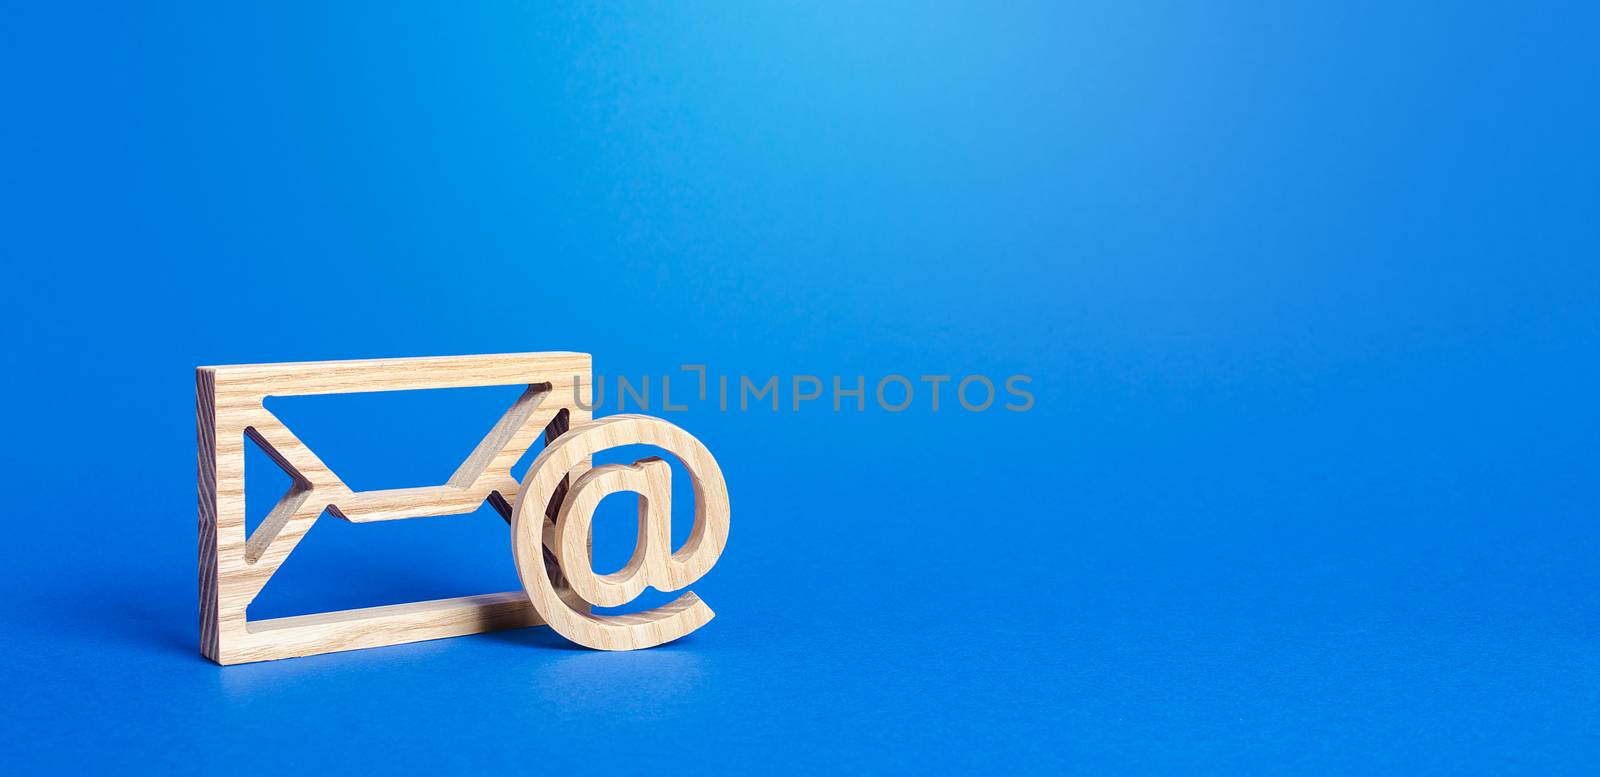 Email figure on blue background. Envelope and AT commercial sign symbol. Concept of email address. Contacts and communication. Business representations on the Internet and social media. Feedback